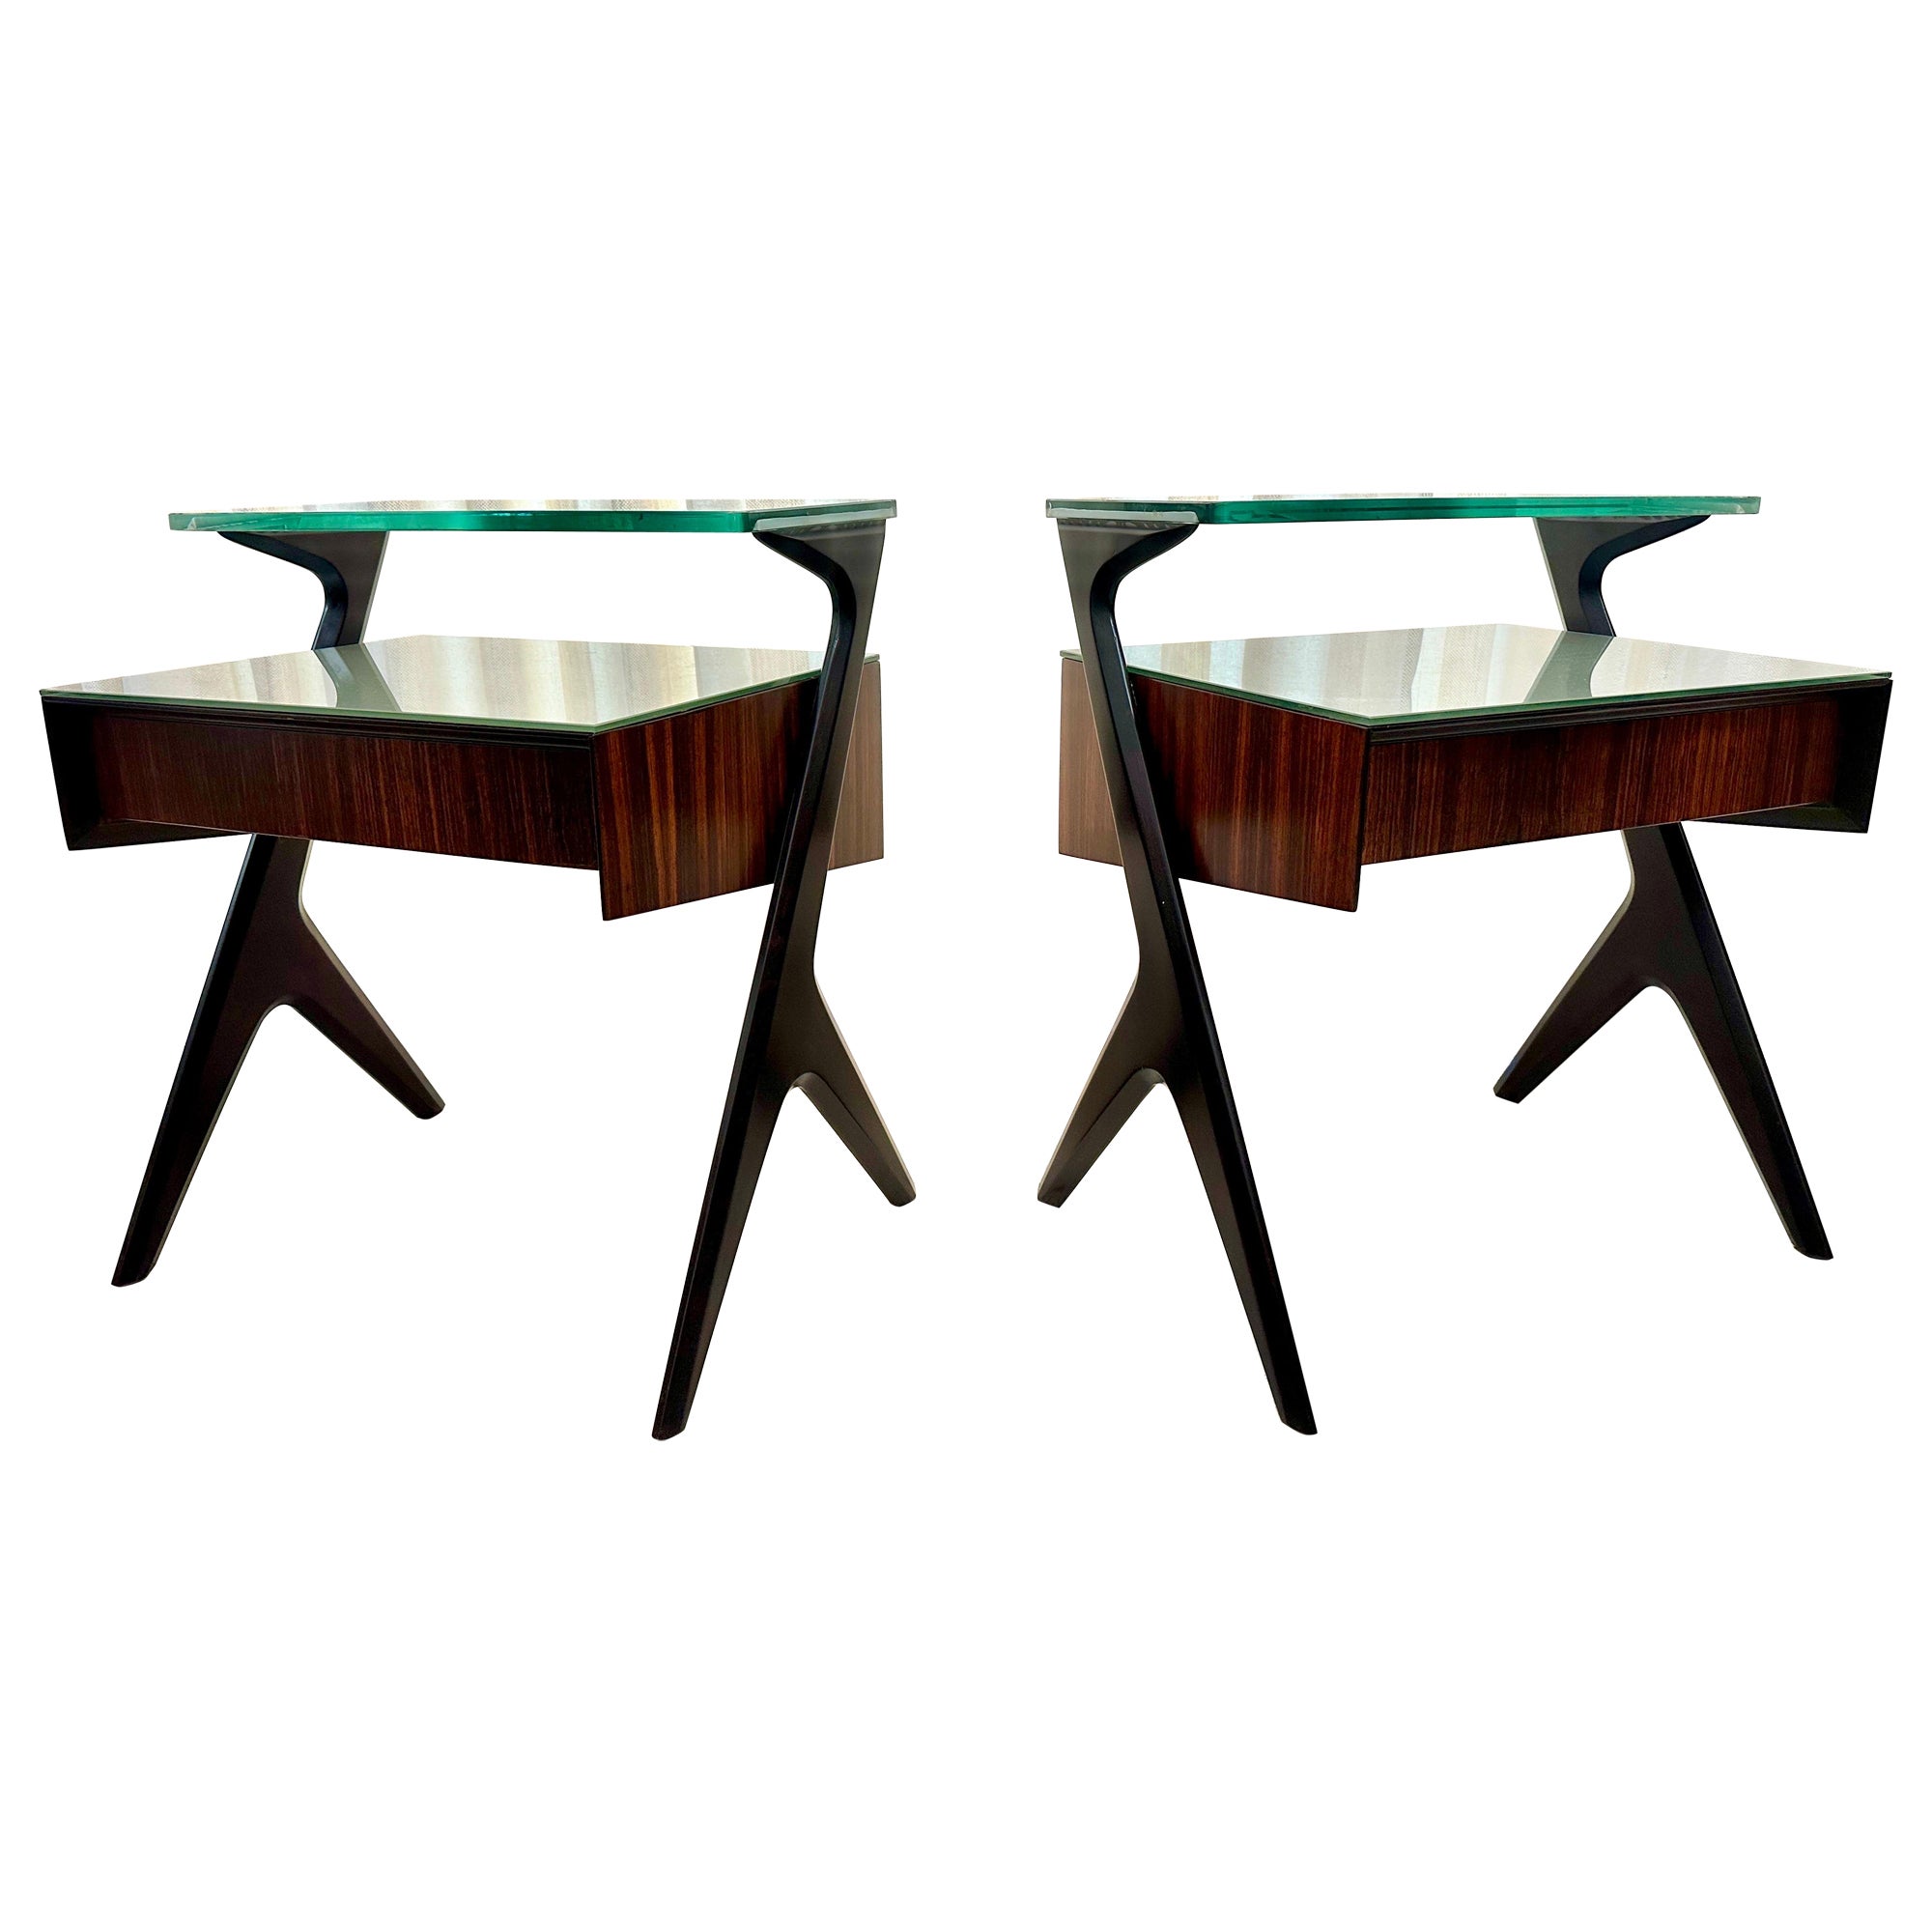 Italian Mid-Century Side-Tables/ Night Stands by Vittorio Dassi, 1950's For Sale